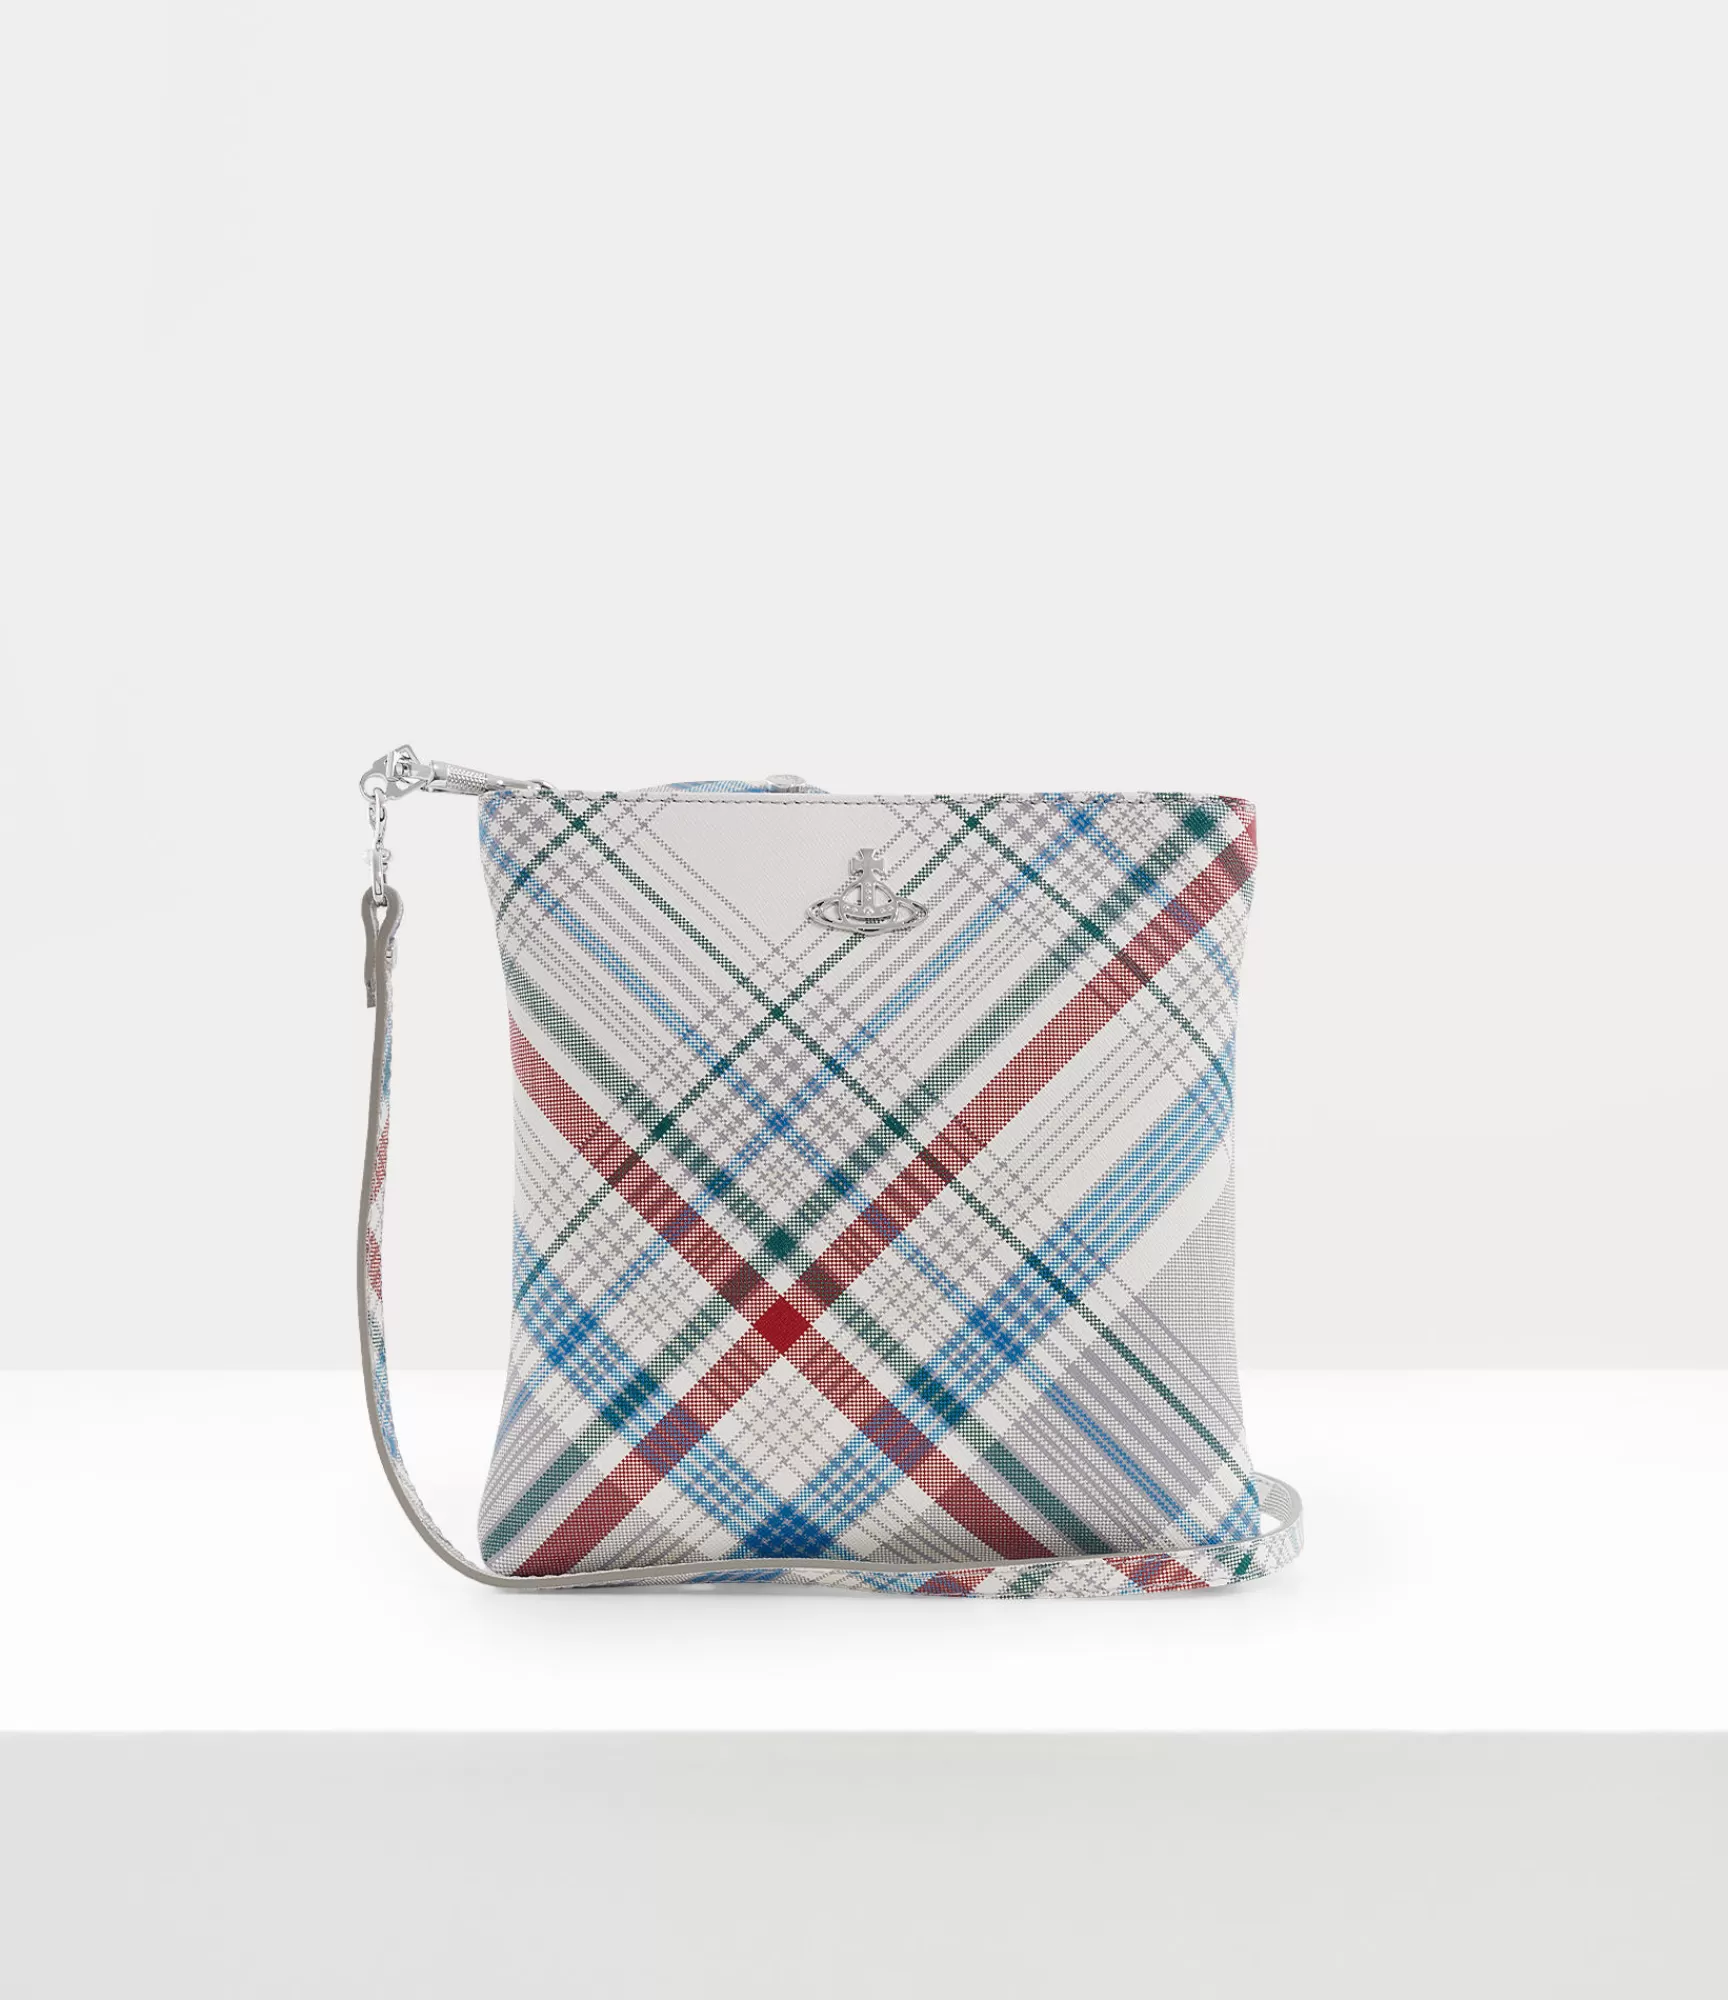 Vivienne Westwood Crossbody Bags*SQUIRE SQUARE CROSSBODY Madras Check